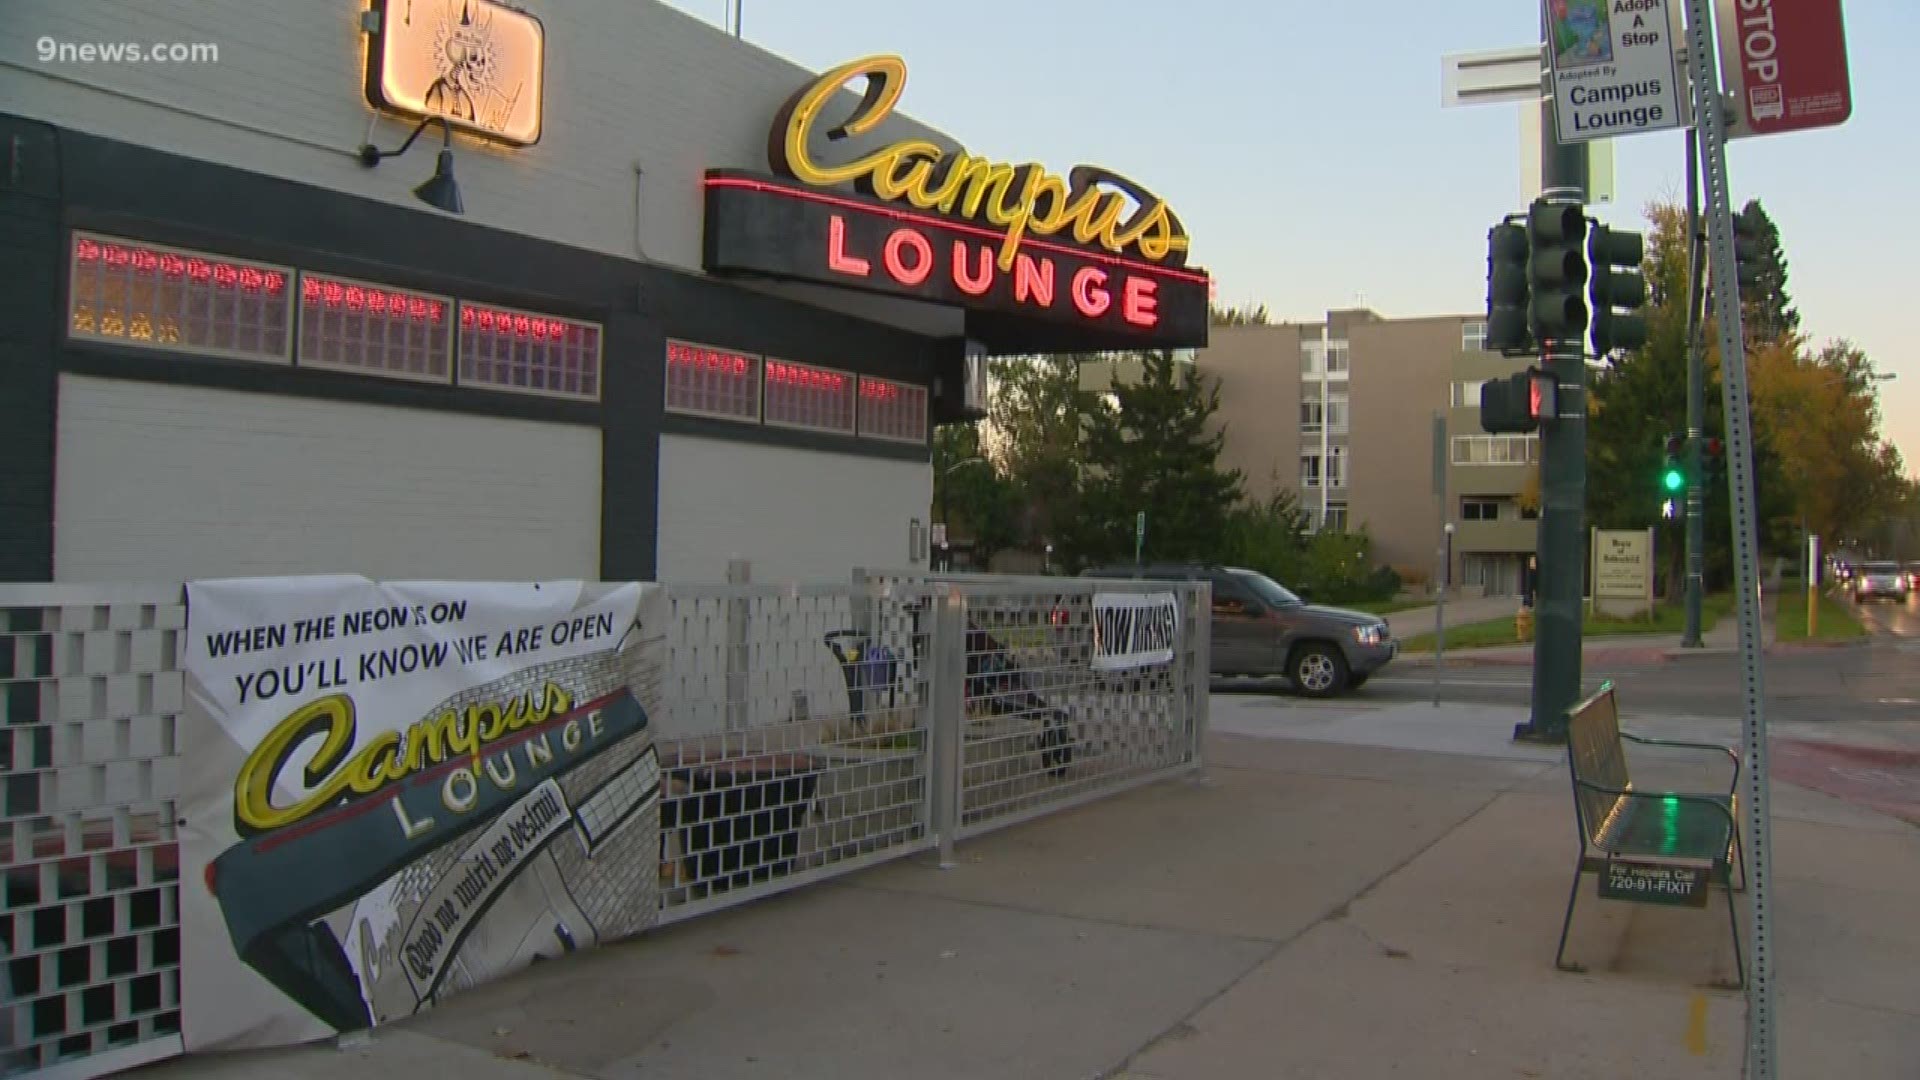 The Campus Lounge has served as a favorite neighborhood sports bar for more than 40 years.